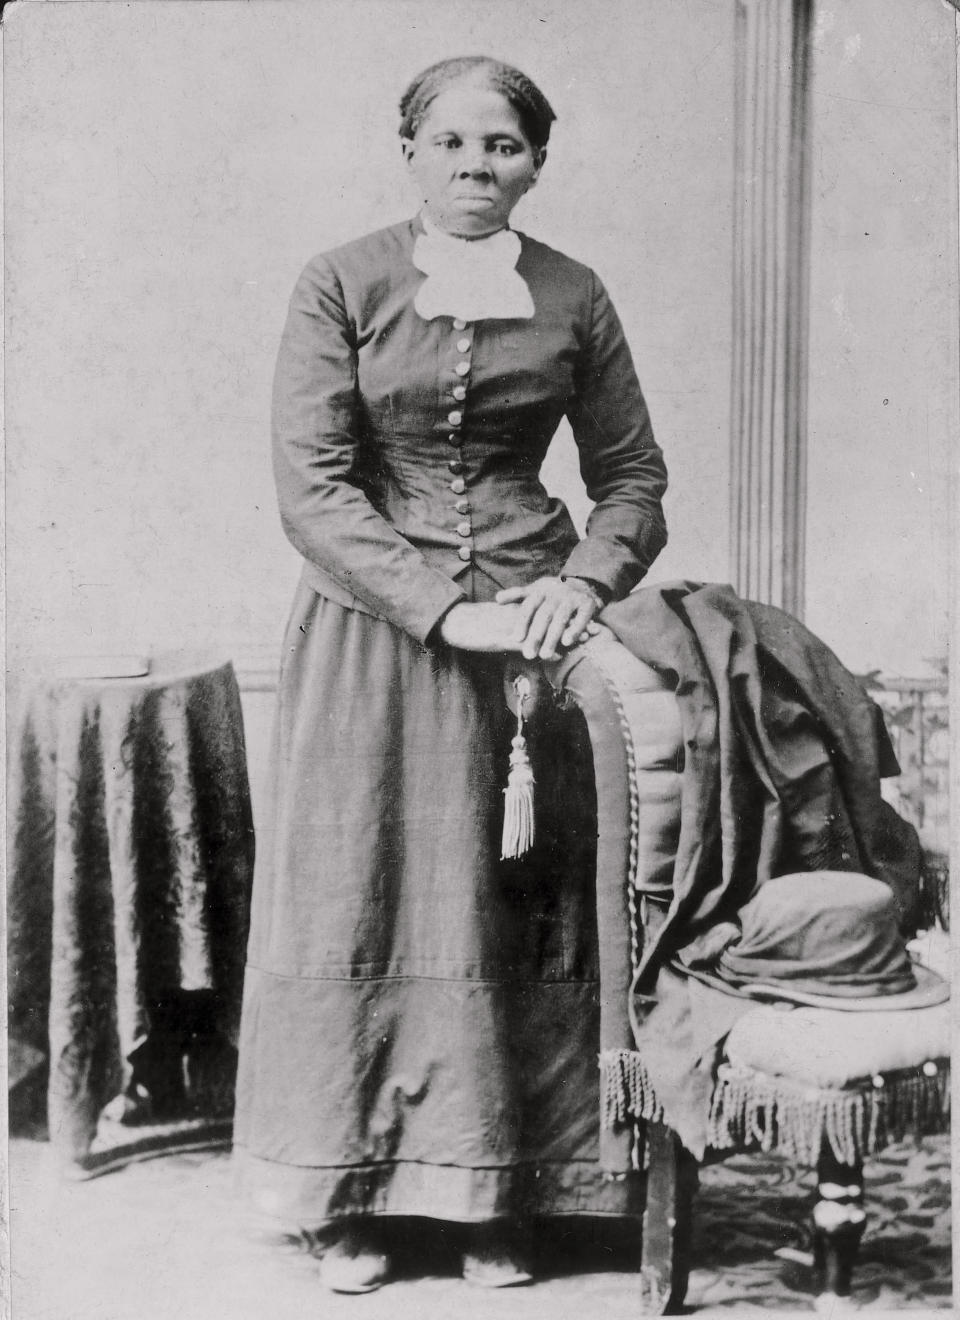 Harriet Tubman in a photograph dating from 1860-75. She escaped from slavery as a young woman and eventually helped lead dozens of other slaves to freedom. (Photo: Harvey B. Lindsley/Library of Congress via Associated Press)